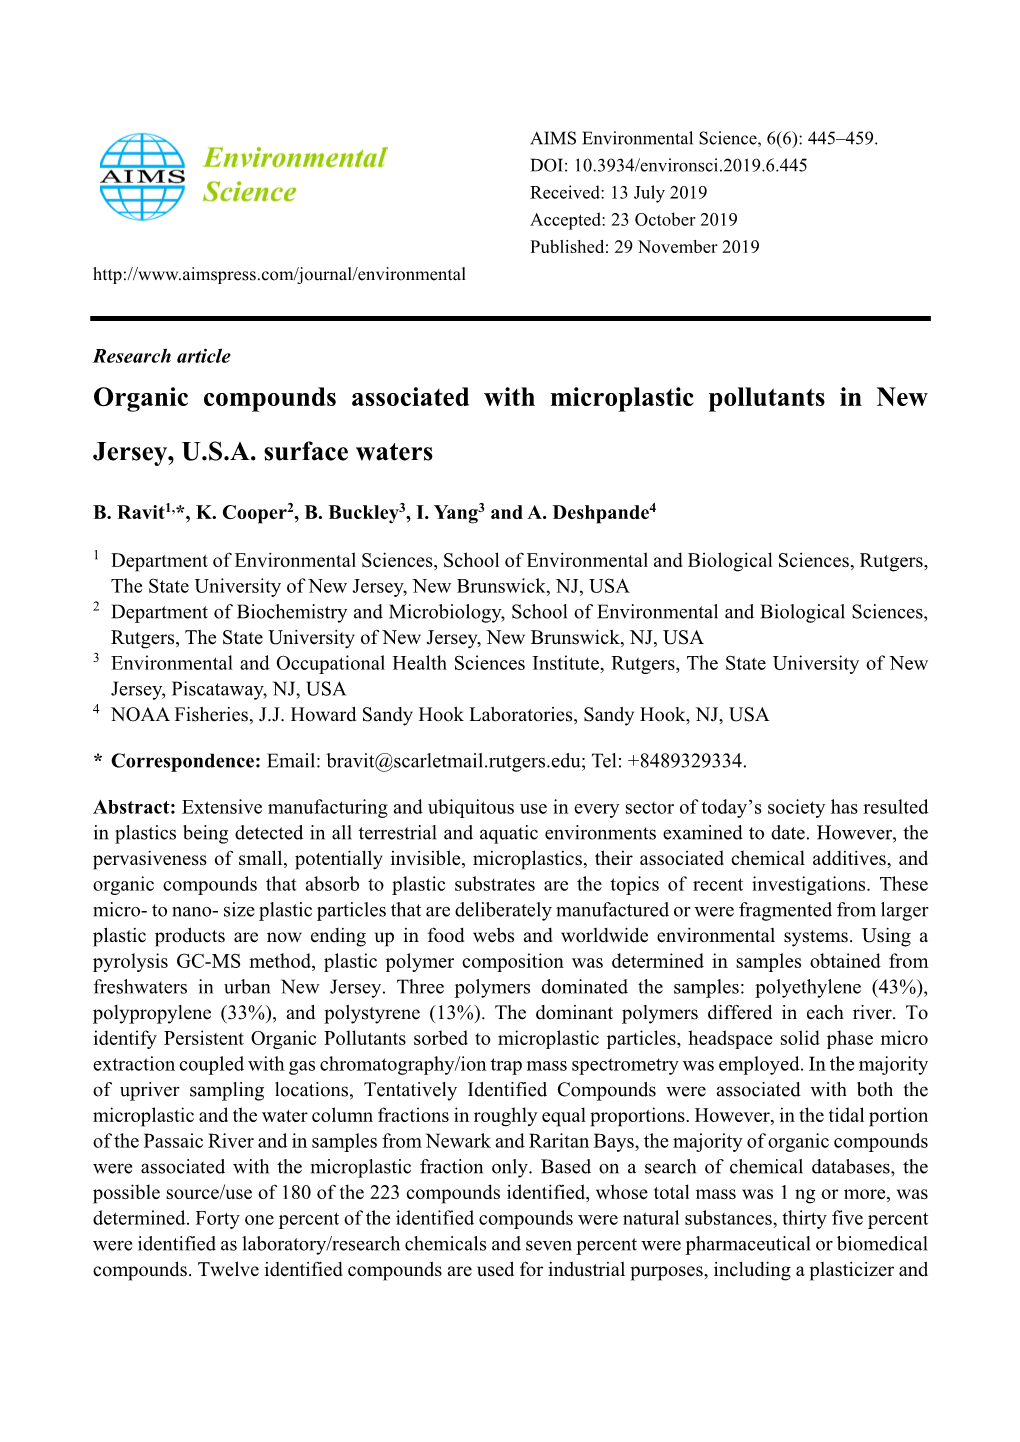 Organic Compounds Associated with Microplastic Pollutants in New Jersey, U.S.A